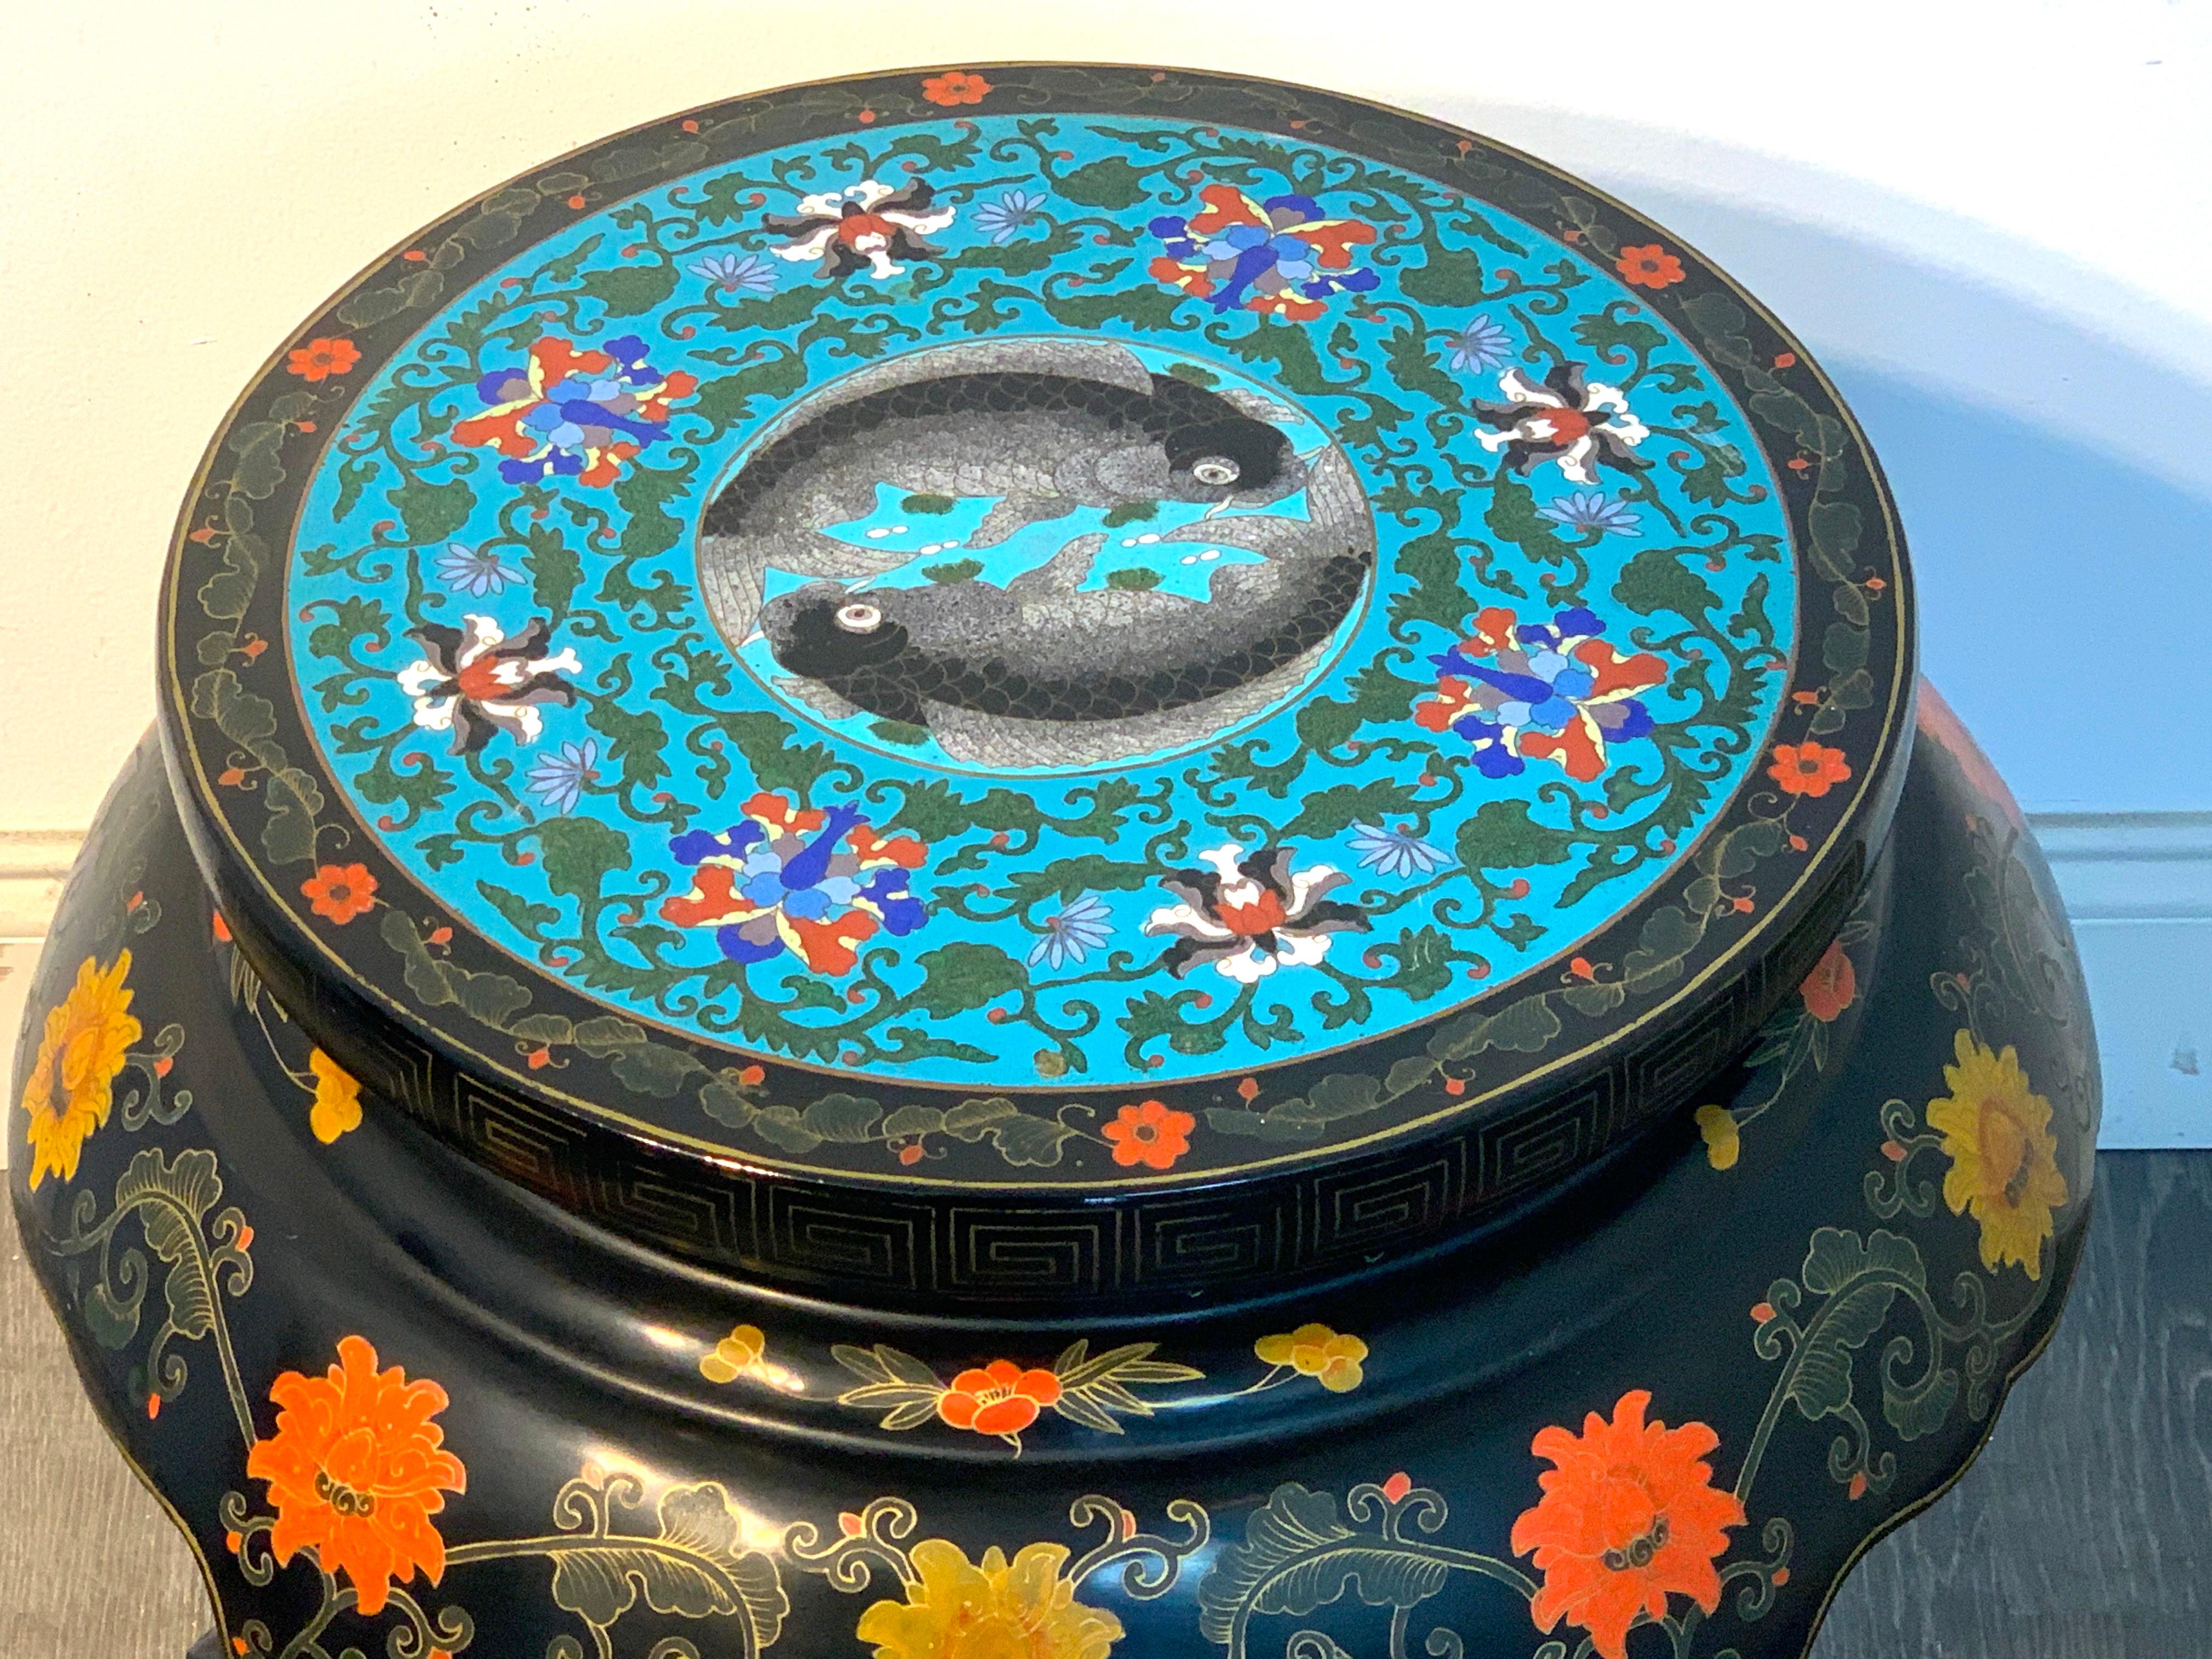 20th Century Chinese Export Black Lacquer and Cloisonné Koi Motif Table